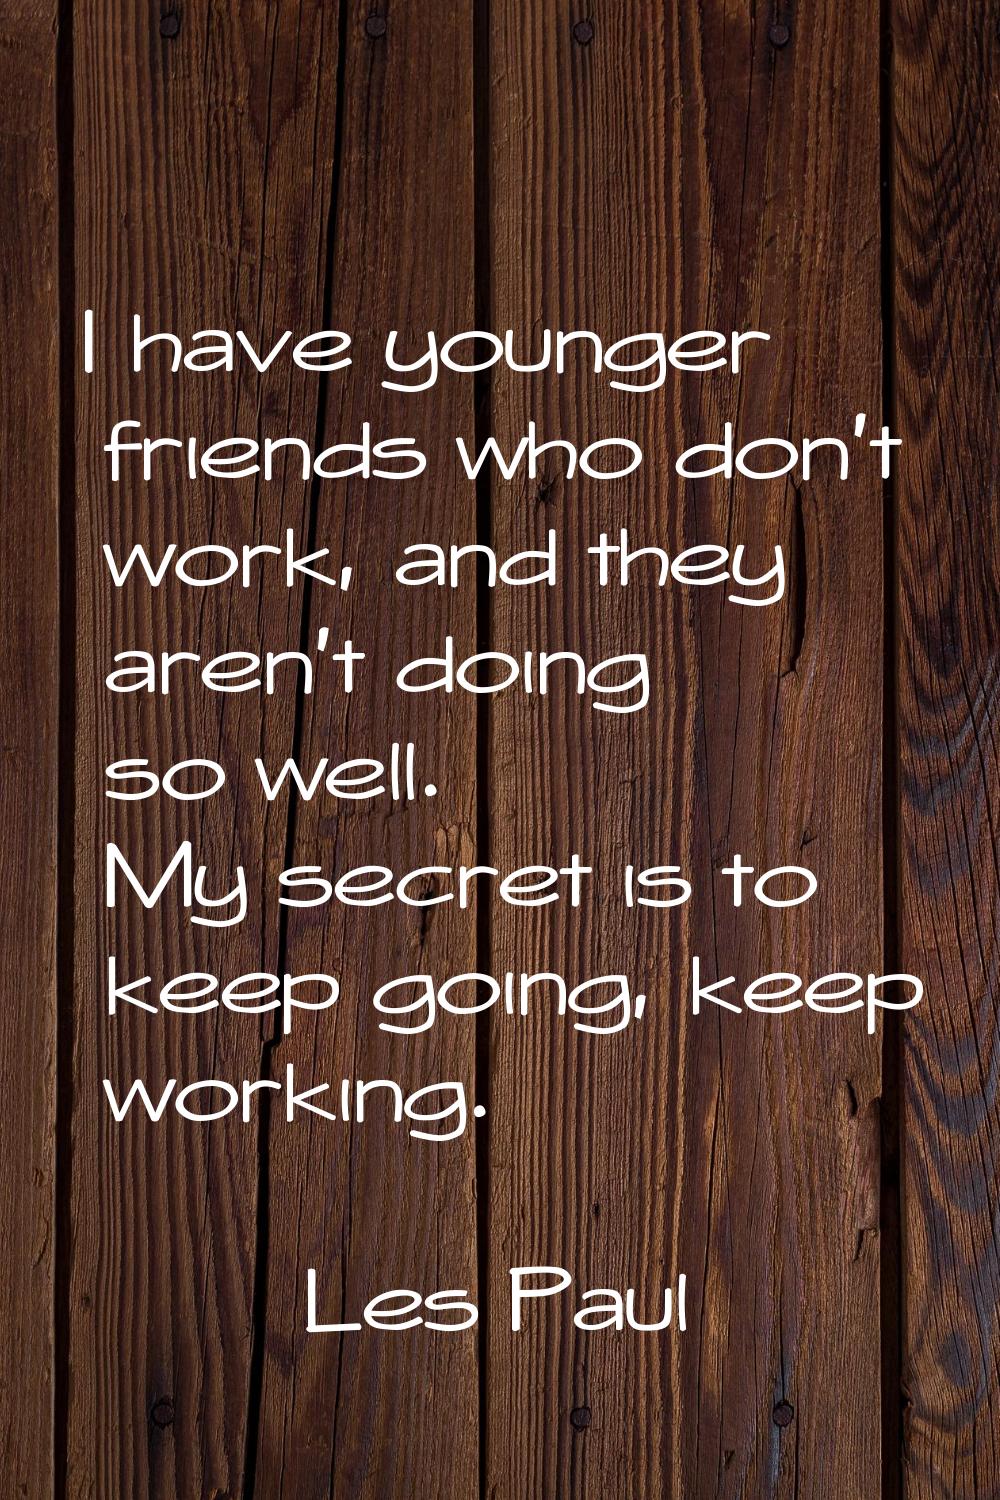 I have younger friends who don't work, and they aren't doing so well. My secret is to keep going, k